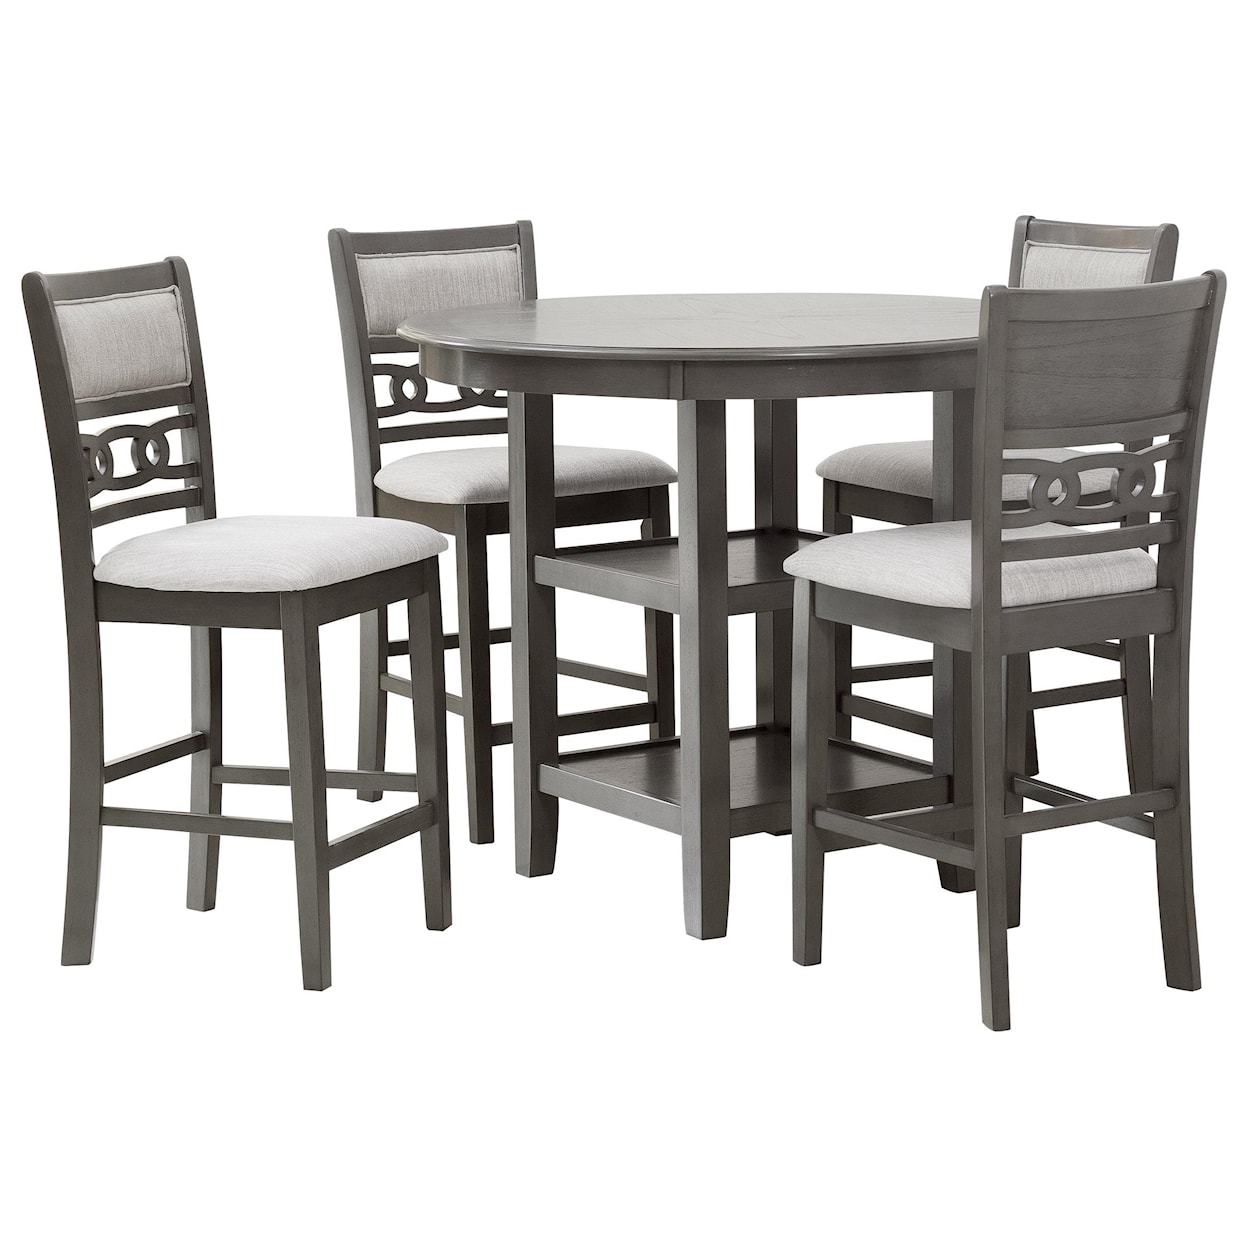 Homelegance Mindy 5 Pc Dining Group